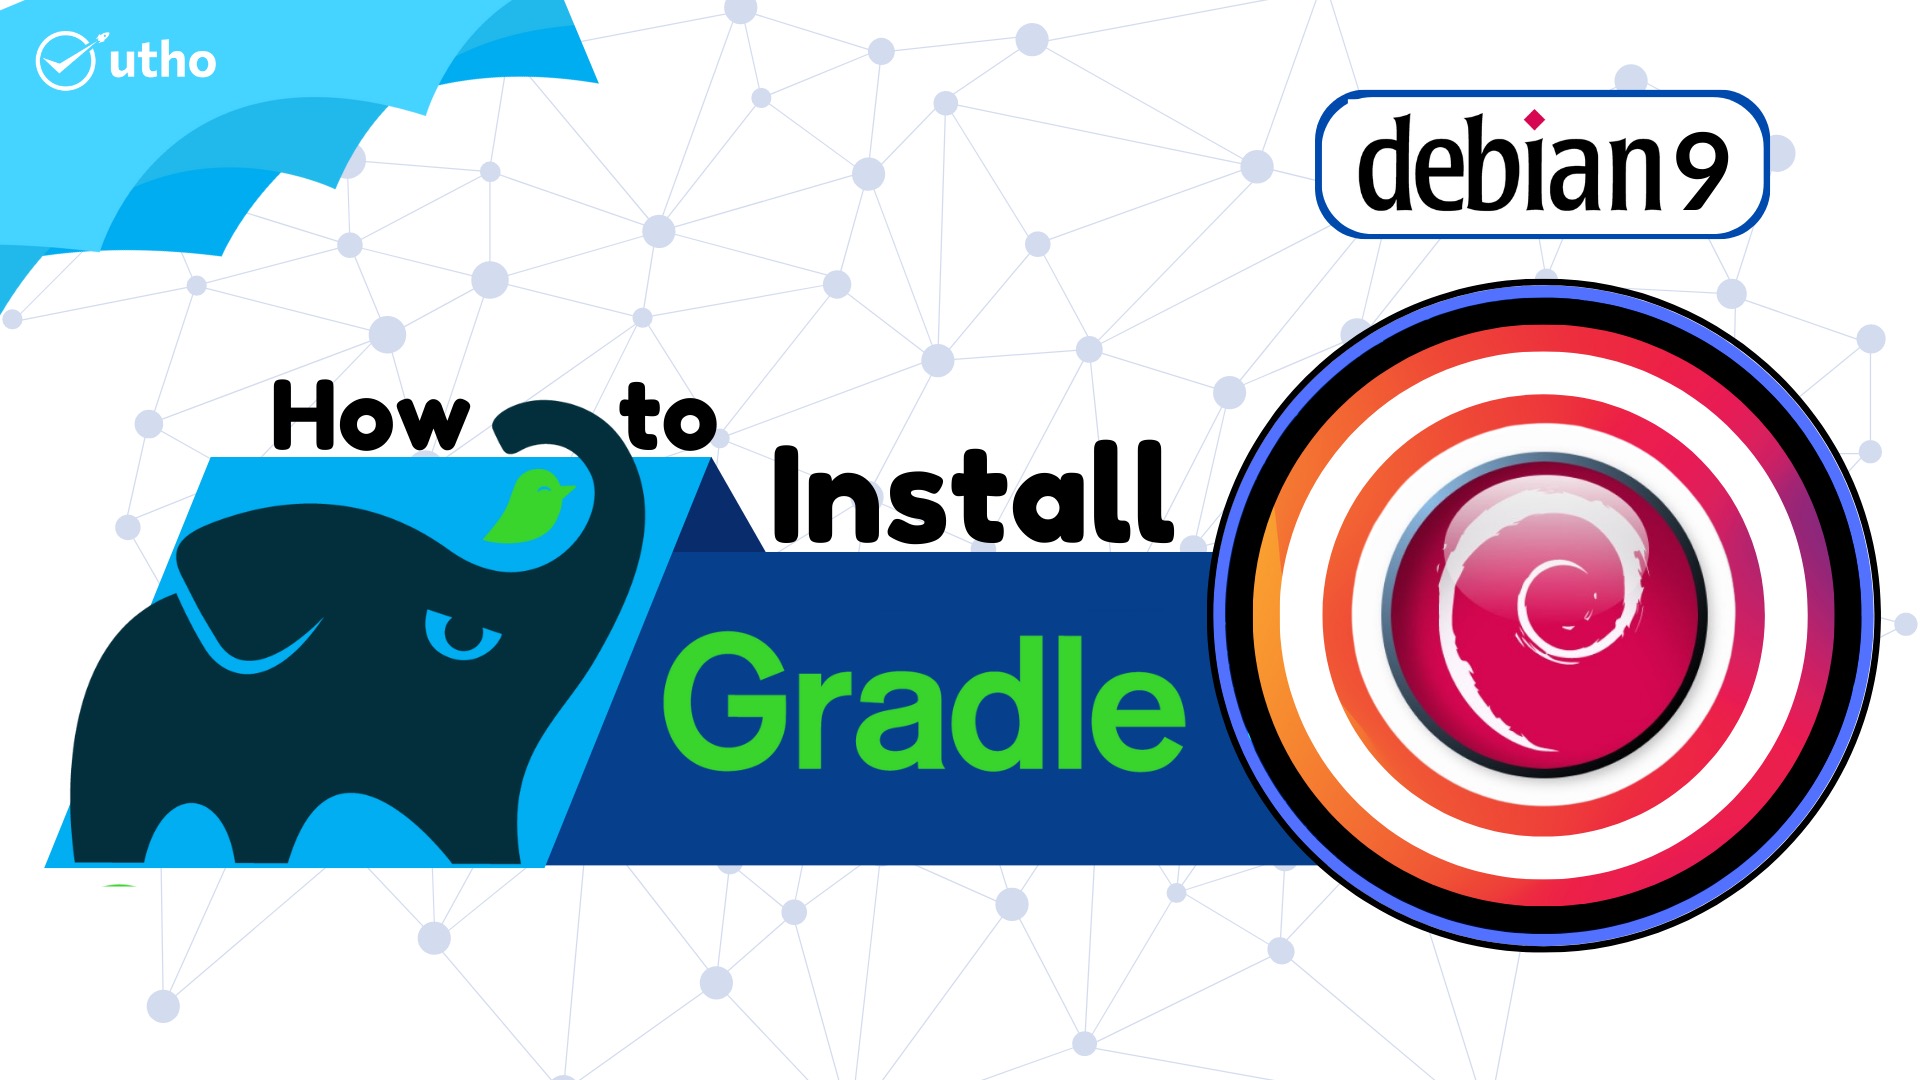 How to install Gradle on Debian 9